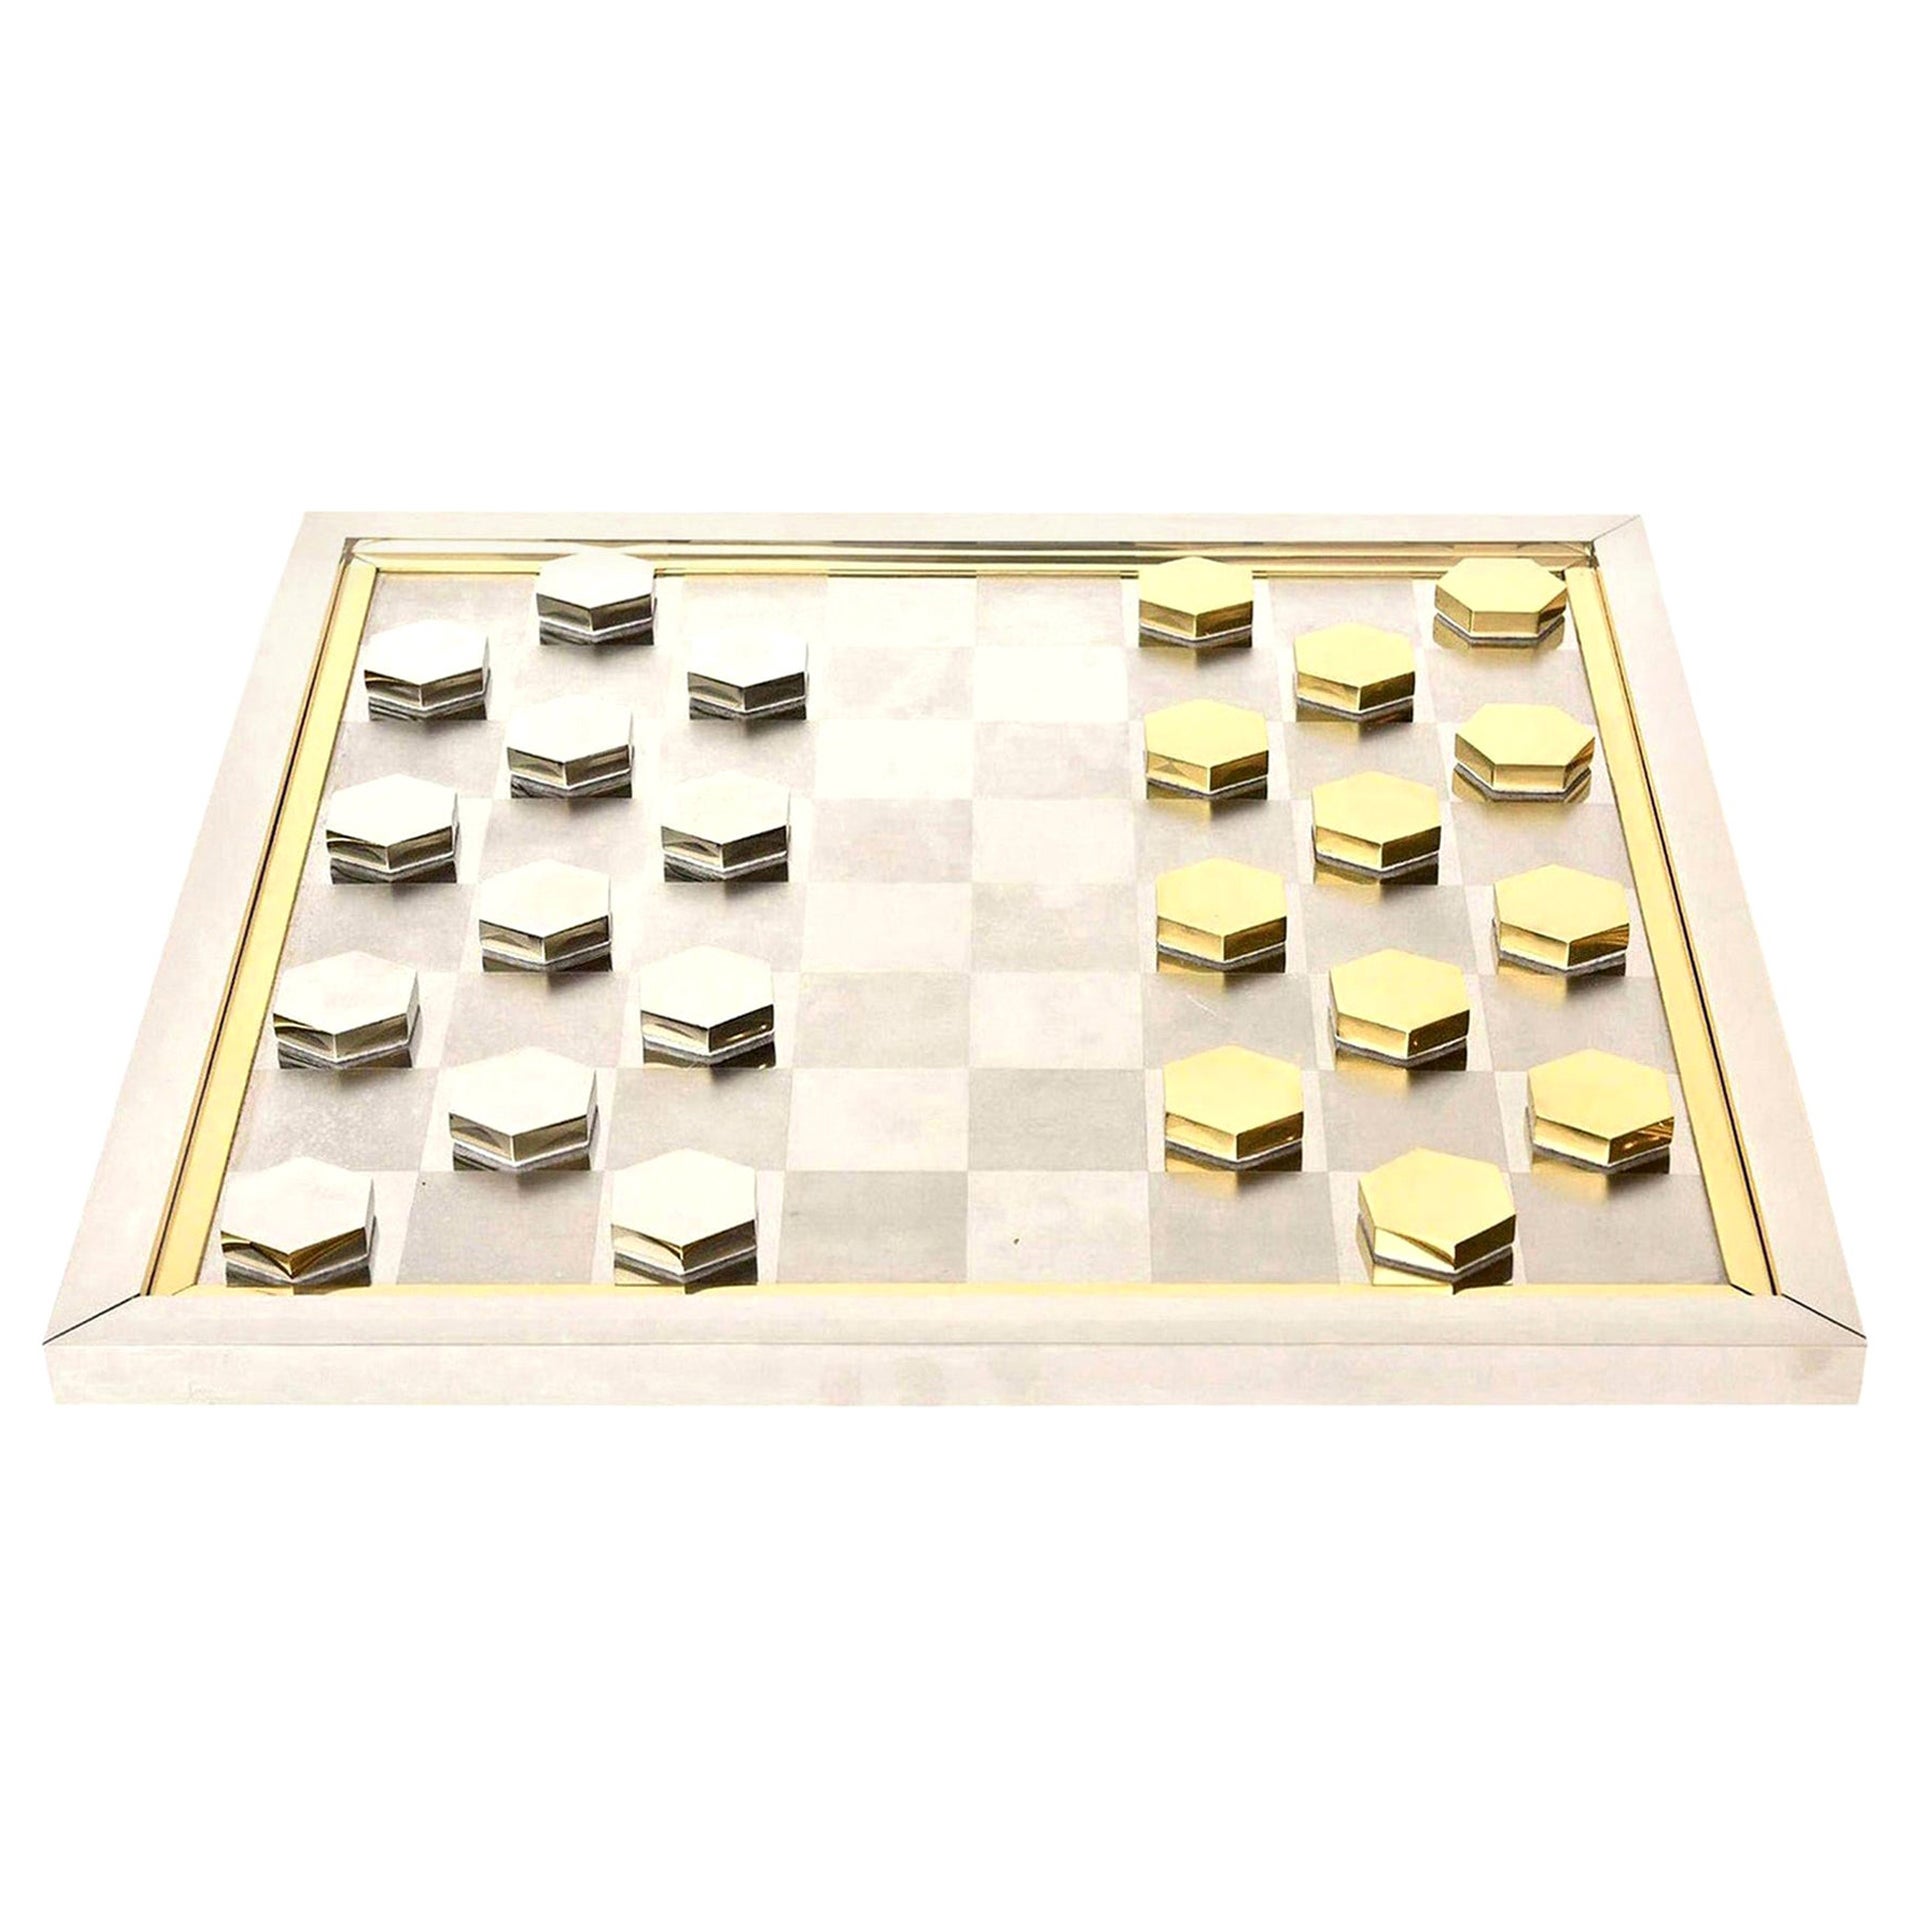 Romeo Rega Signed Brass and Chrome-Plated Checkers Game, Italian Vintage